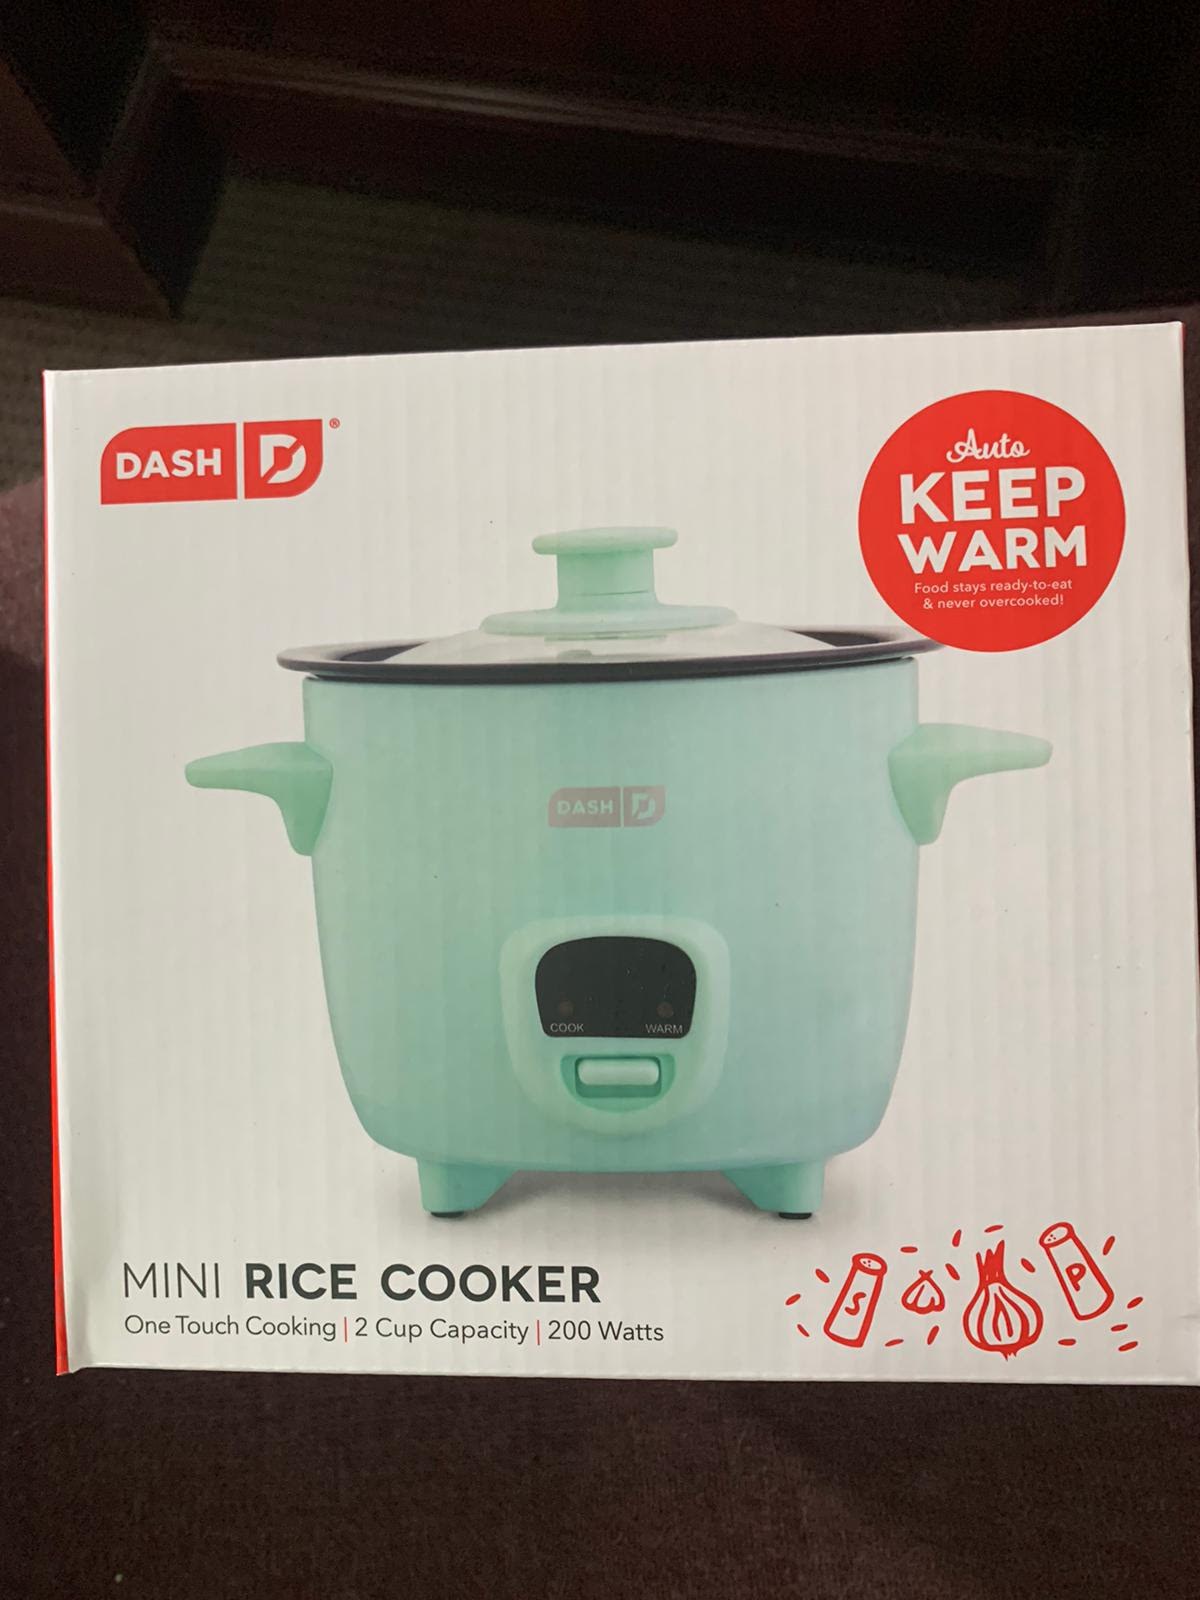 DASH Mini Rice Cooker Steamer with Removable Nonstick Pot. 1008units. EXW Los Angeles $14.50unit.